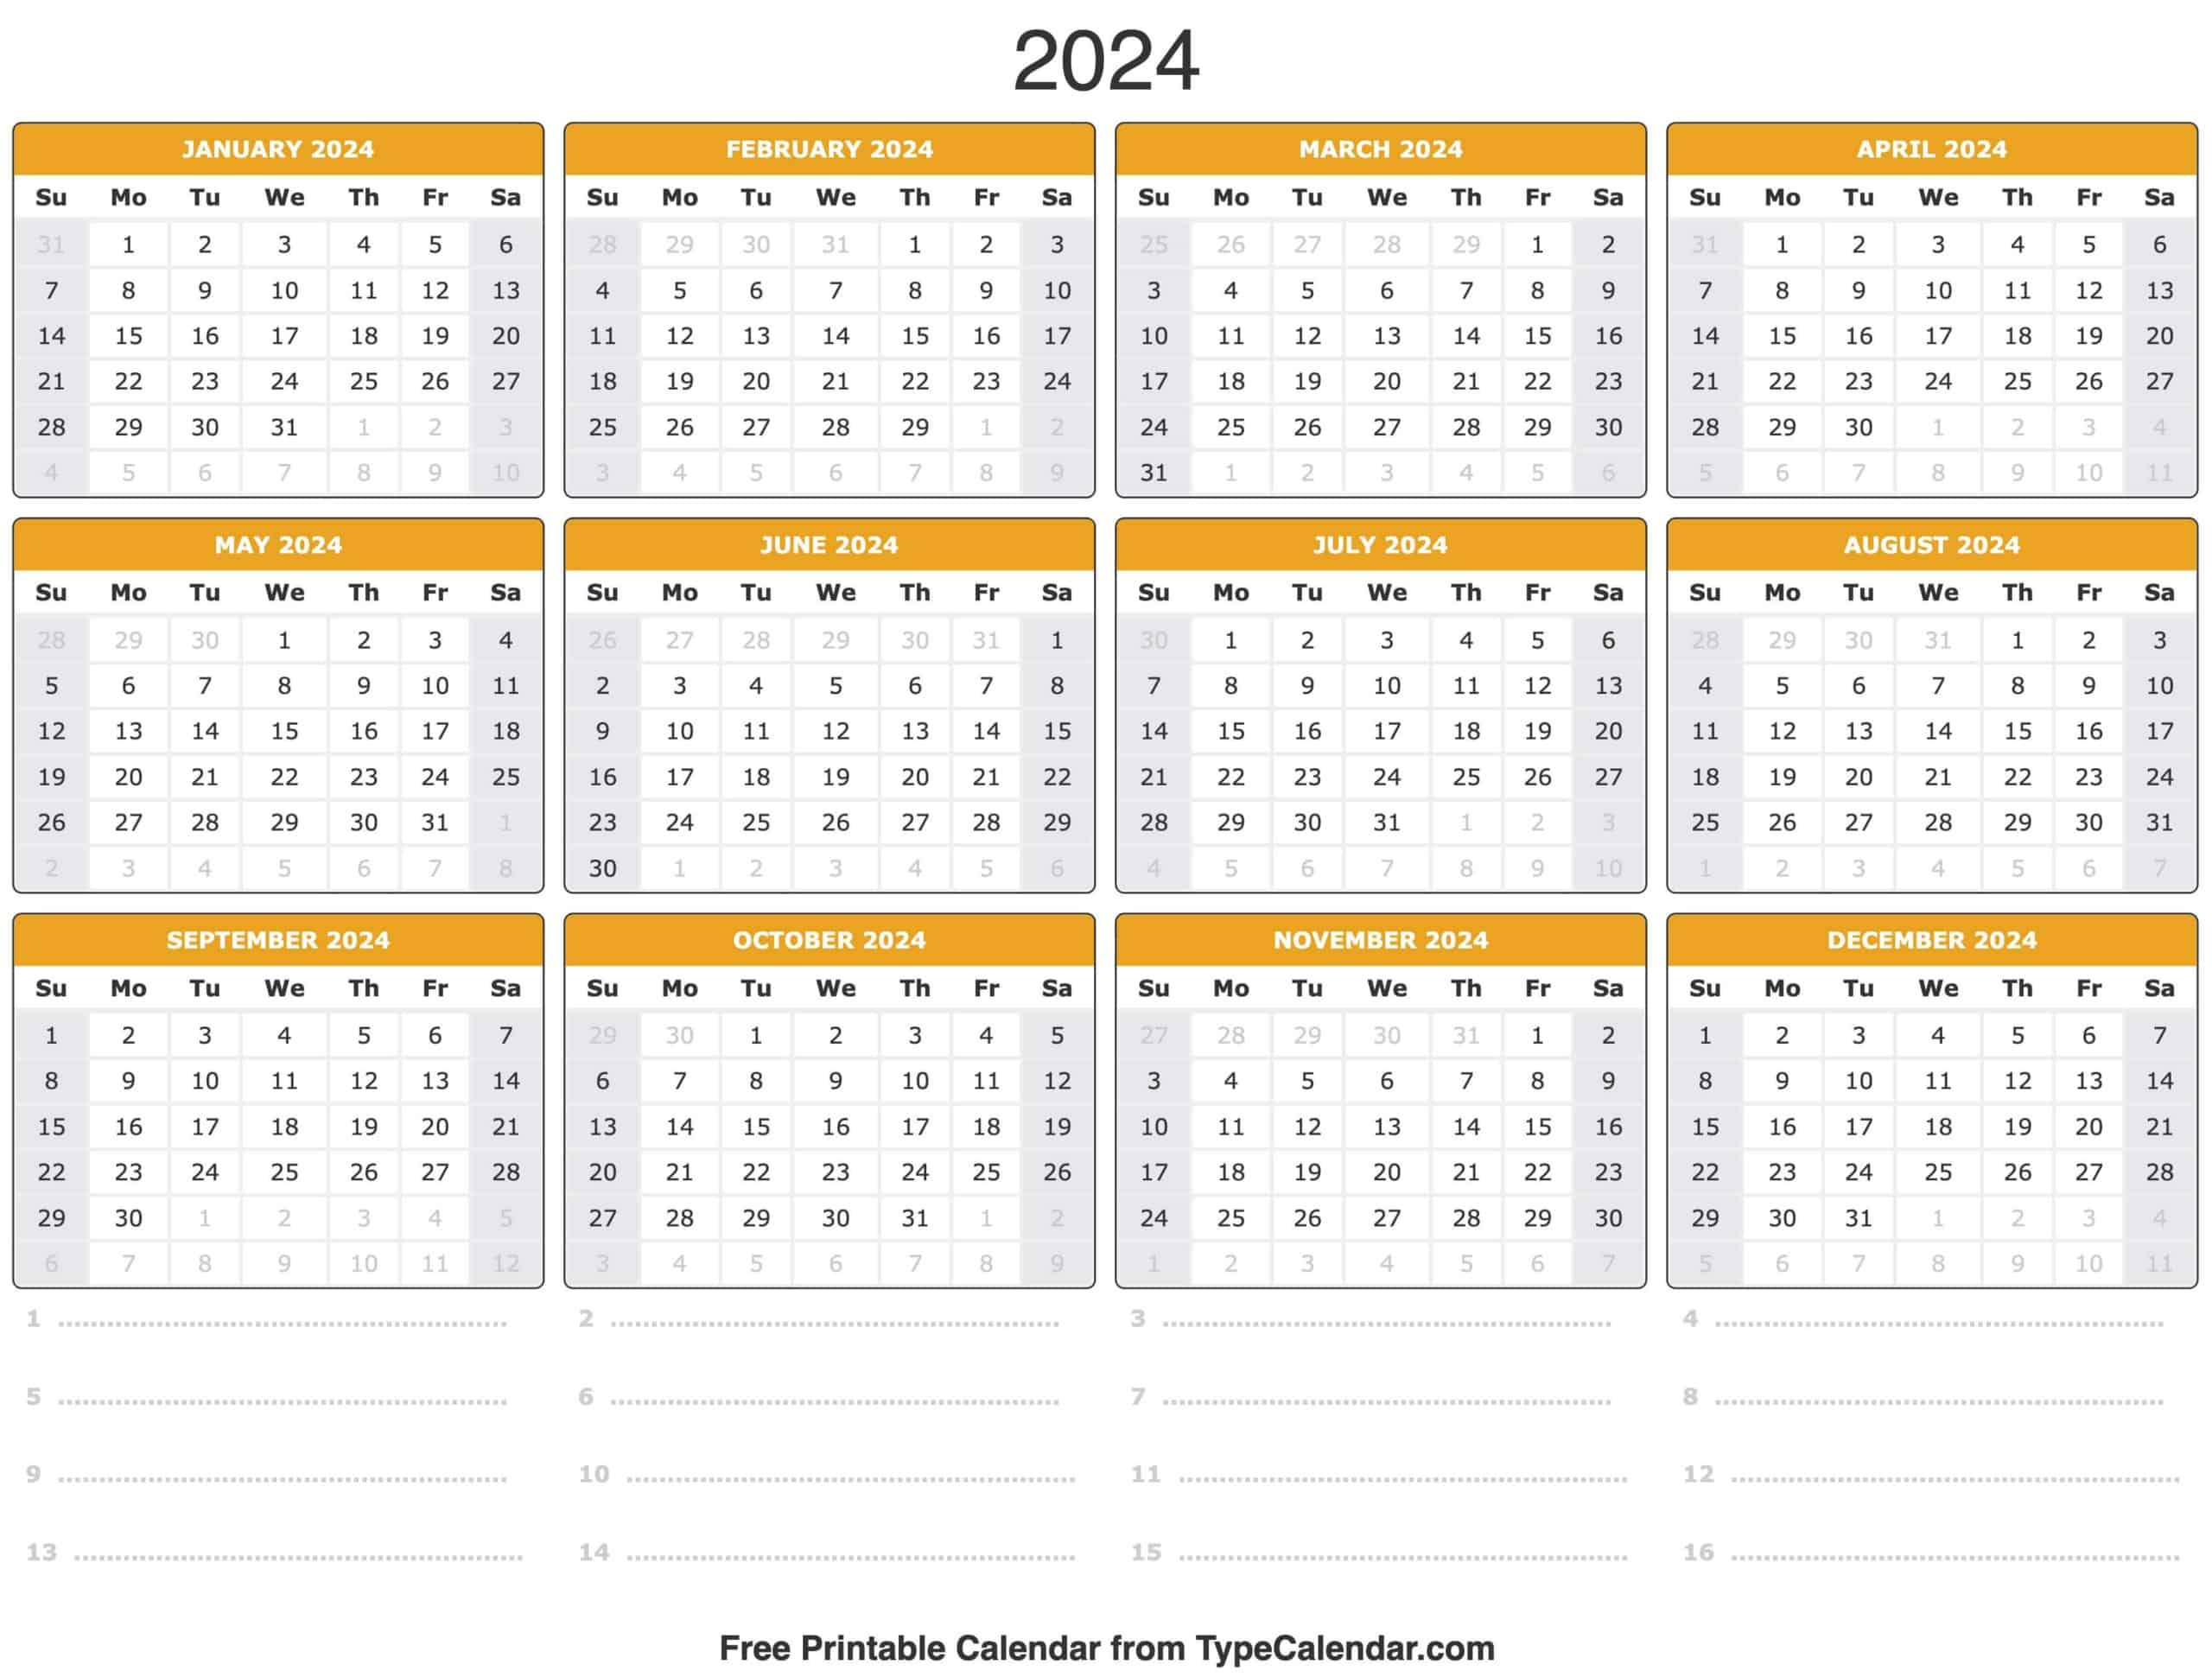 2024 Calendar: Free Printable Calendar With Holidays with 12 Month Wall Calendar Starting July 2024